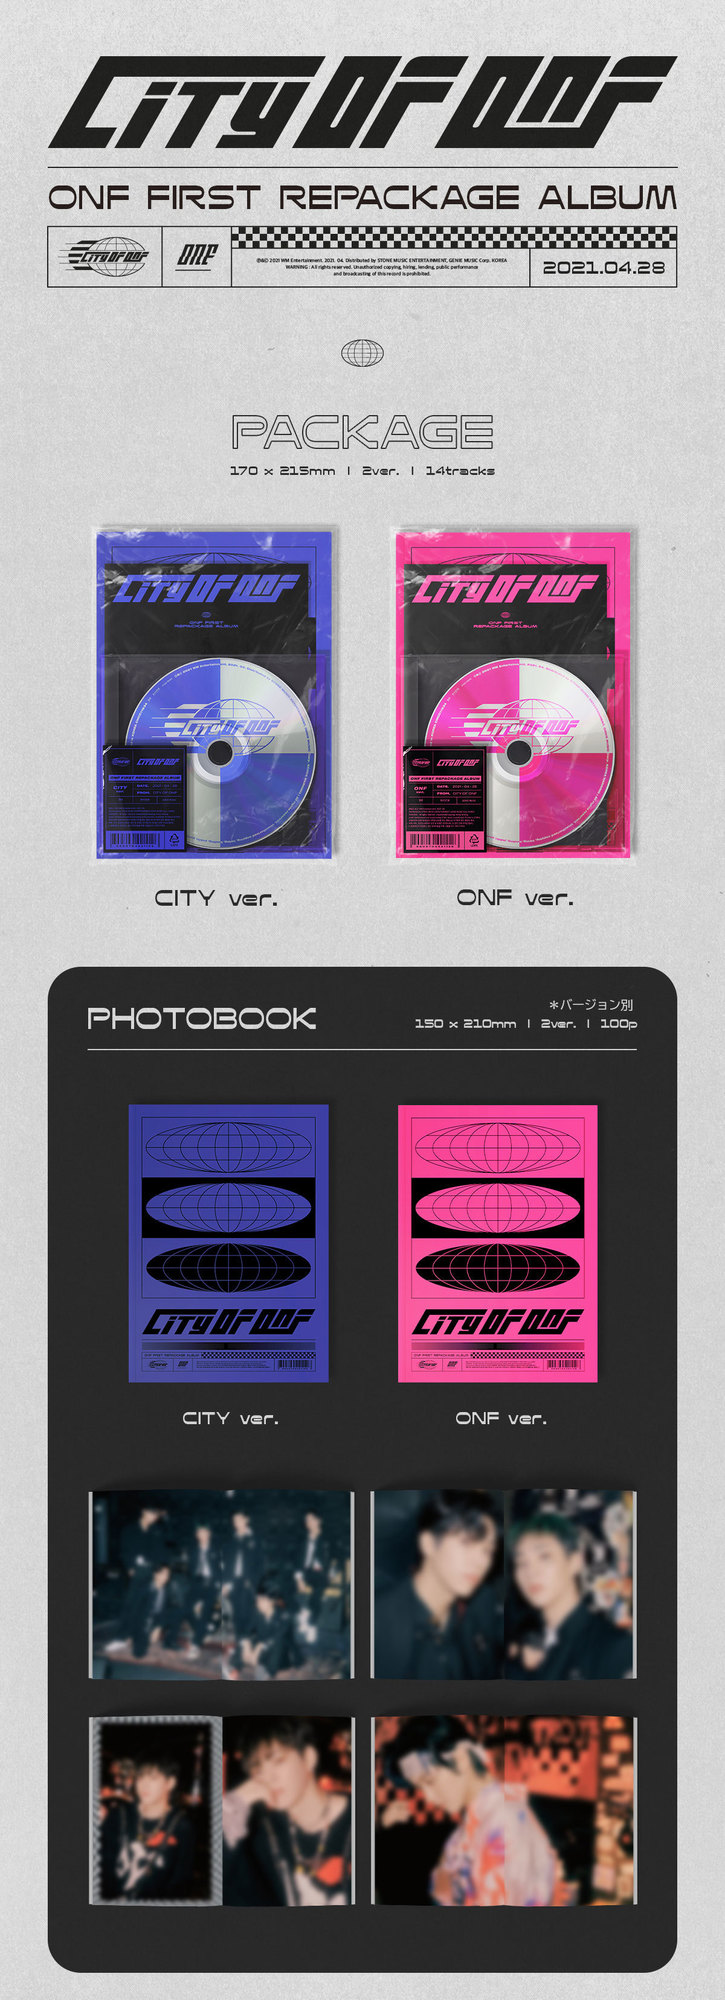 ONF FIRST REPACKAGE ALBUM 「CITY OF ONF」限定特典付き一般販売が 